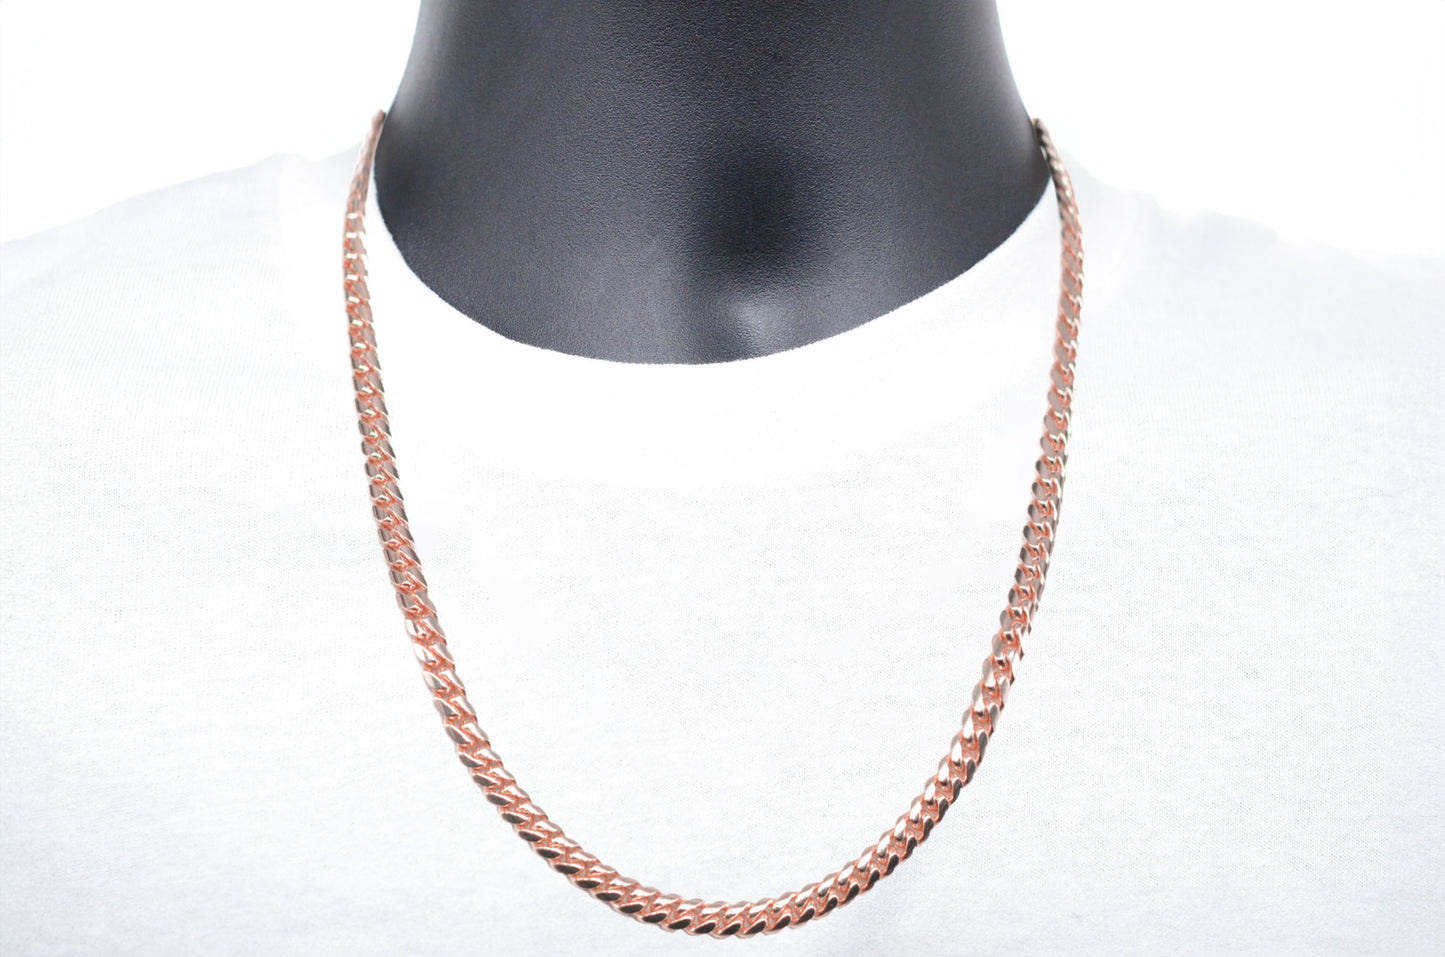 7mm Solid Gold Miami Cuban Chains Solid Gold Cuban Chains